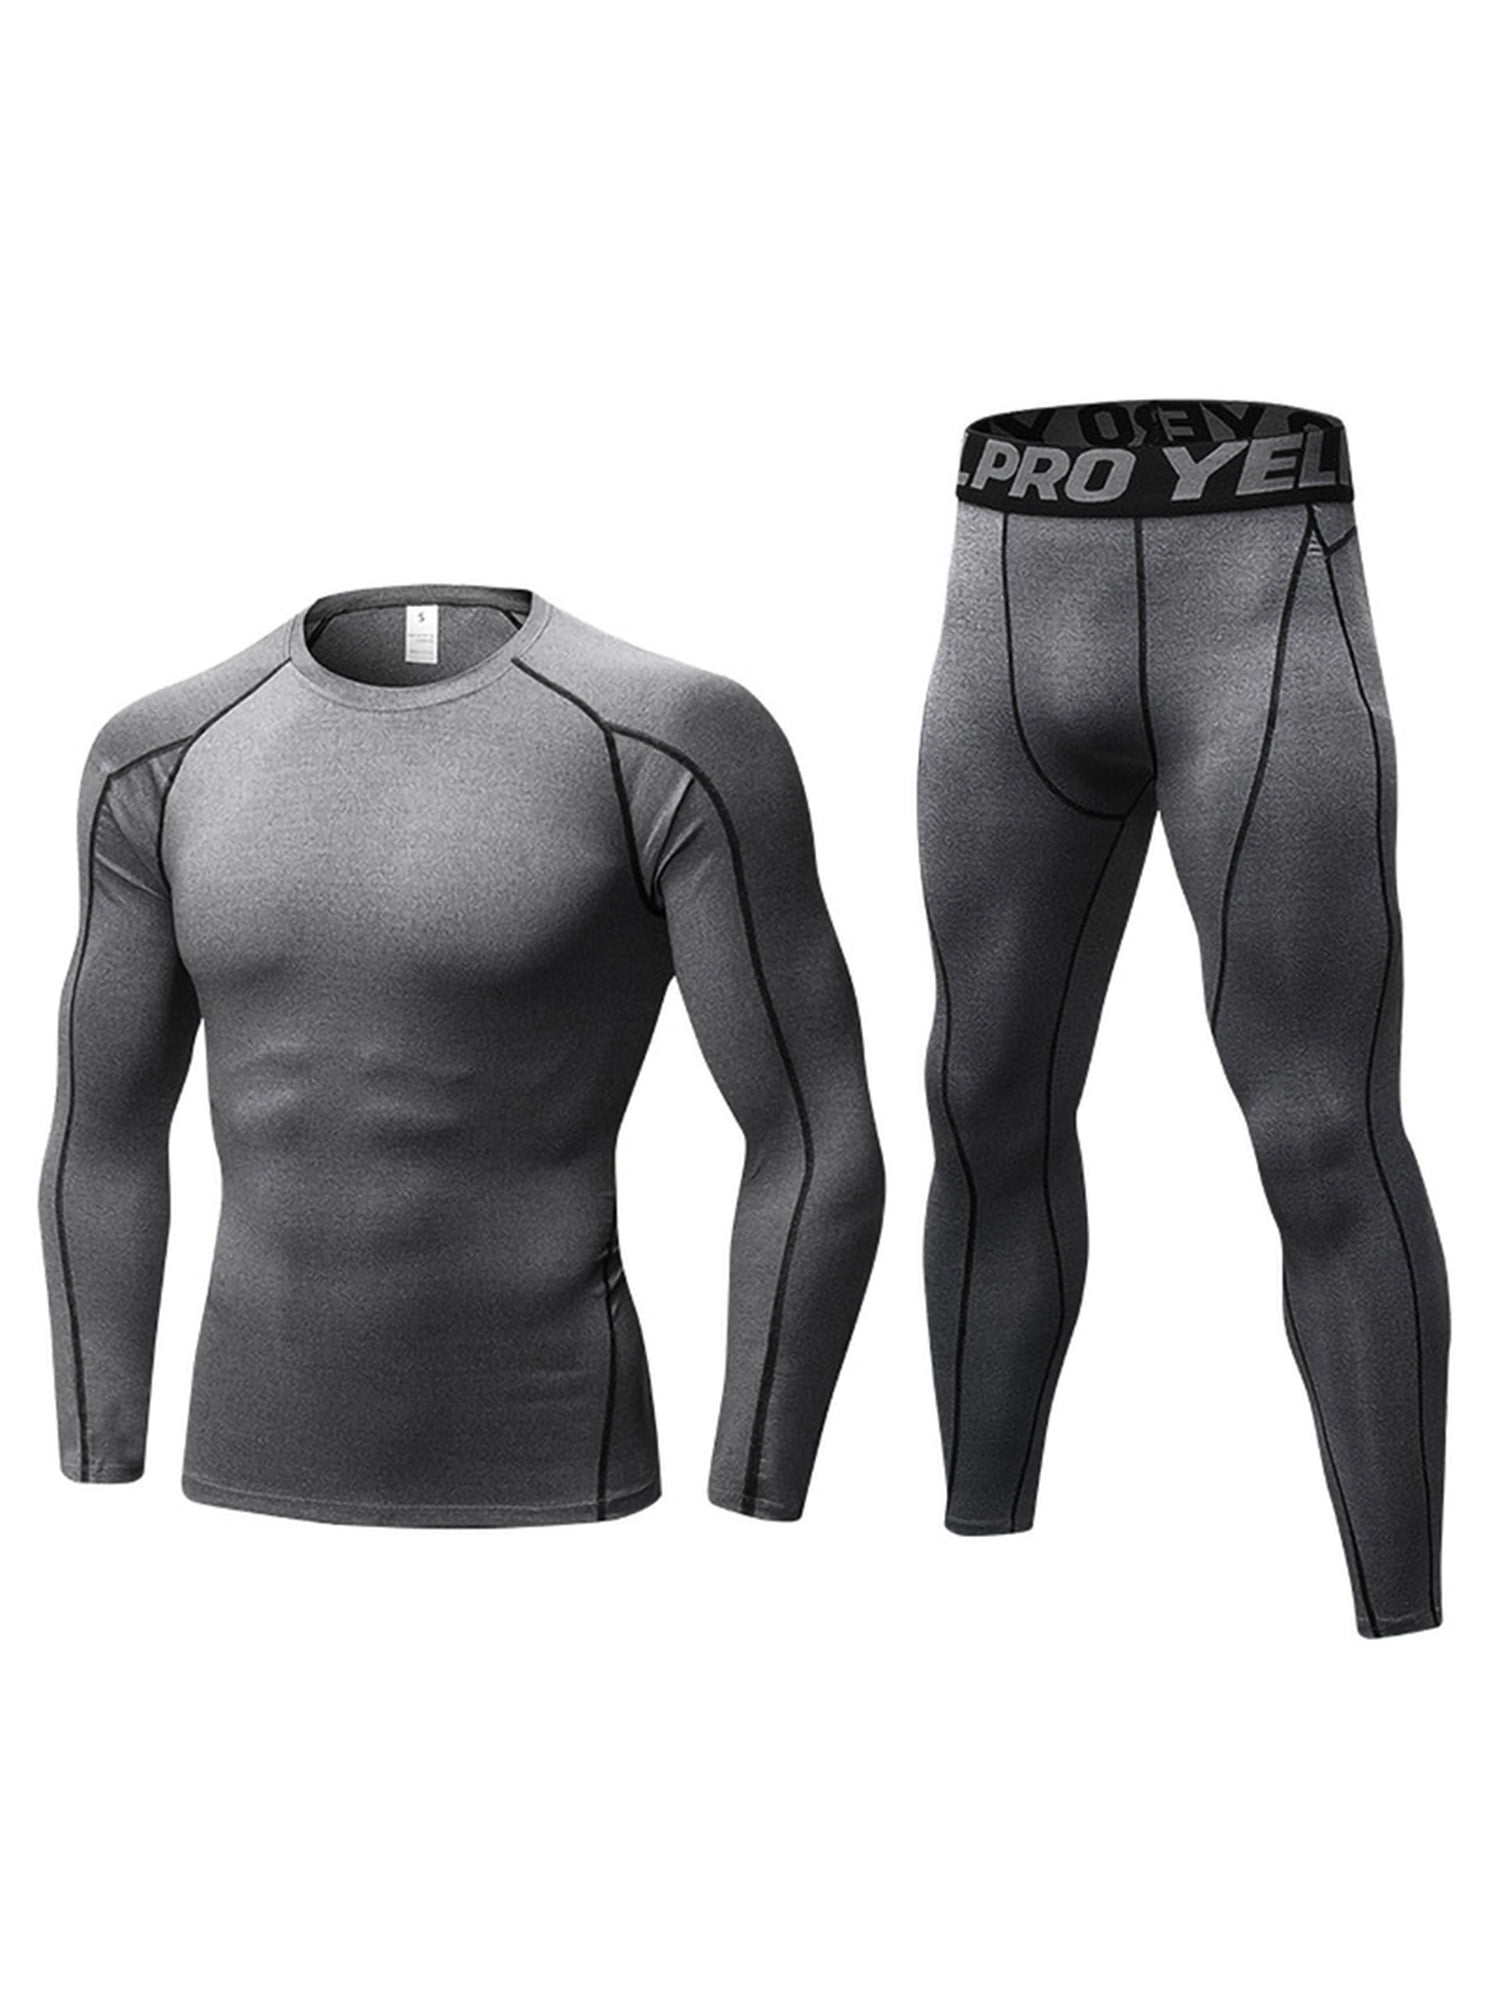 Mens Compression Outfits T-shirt Legging Gym Athletic Workout Set Gym Cool Dry 